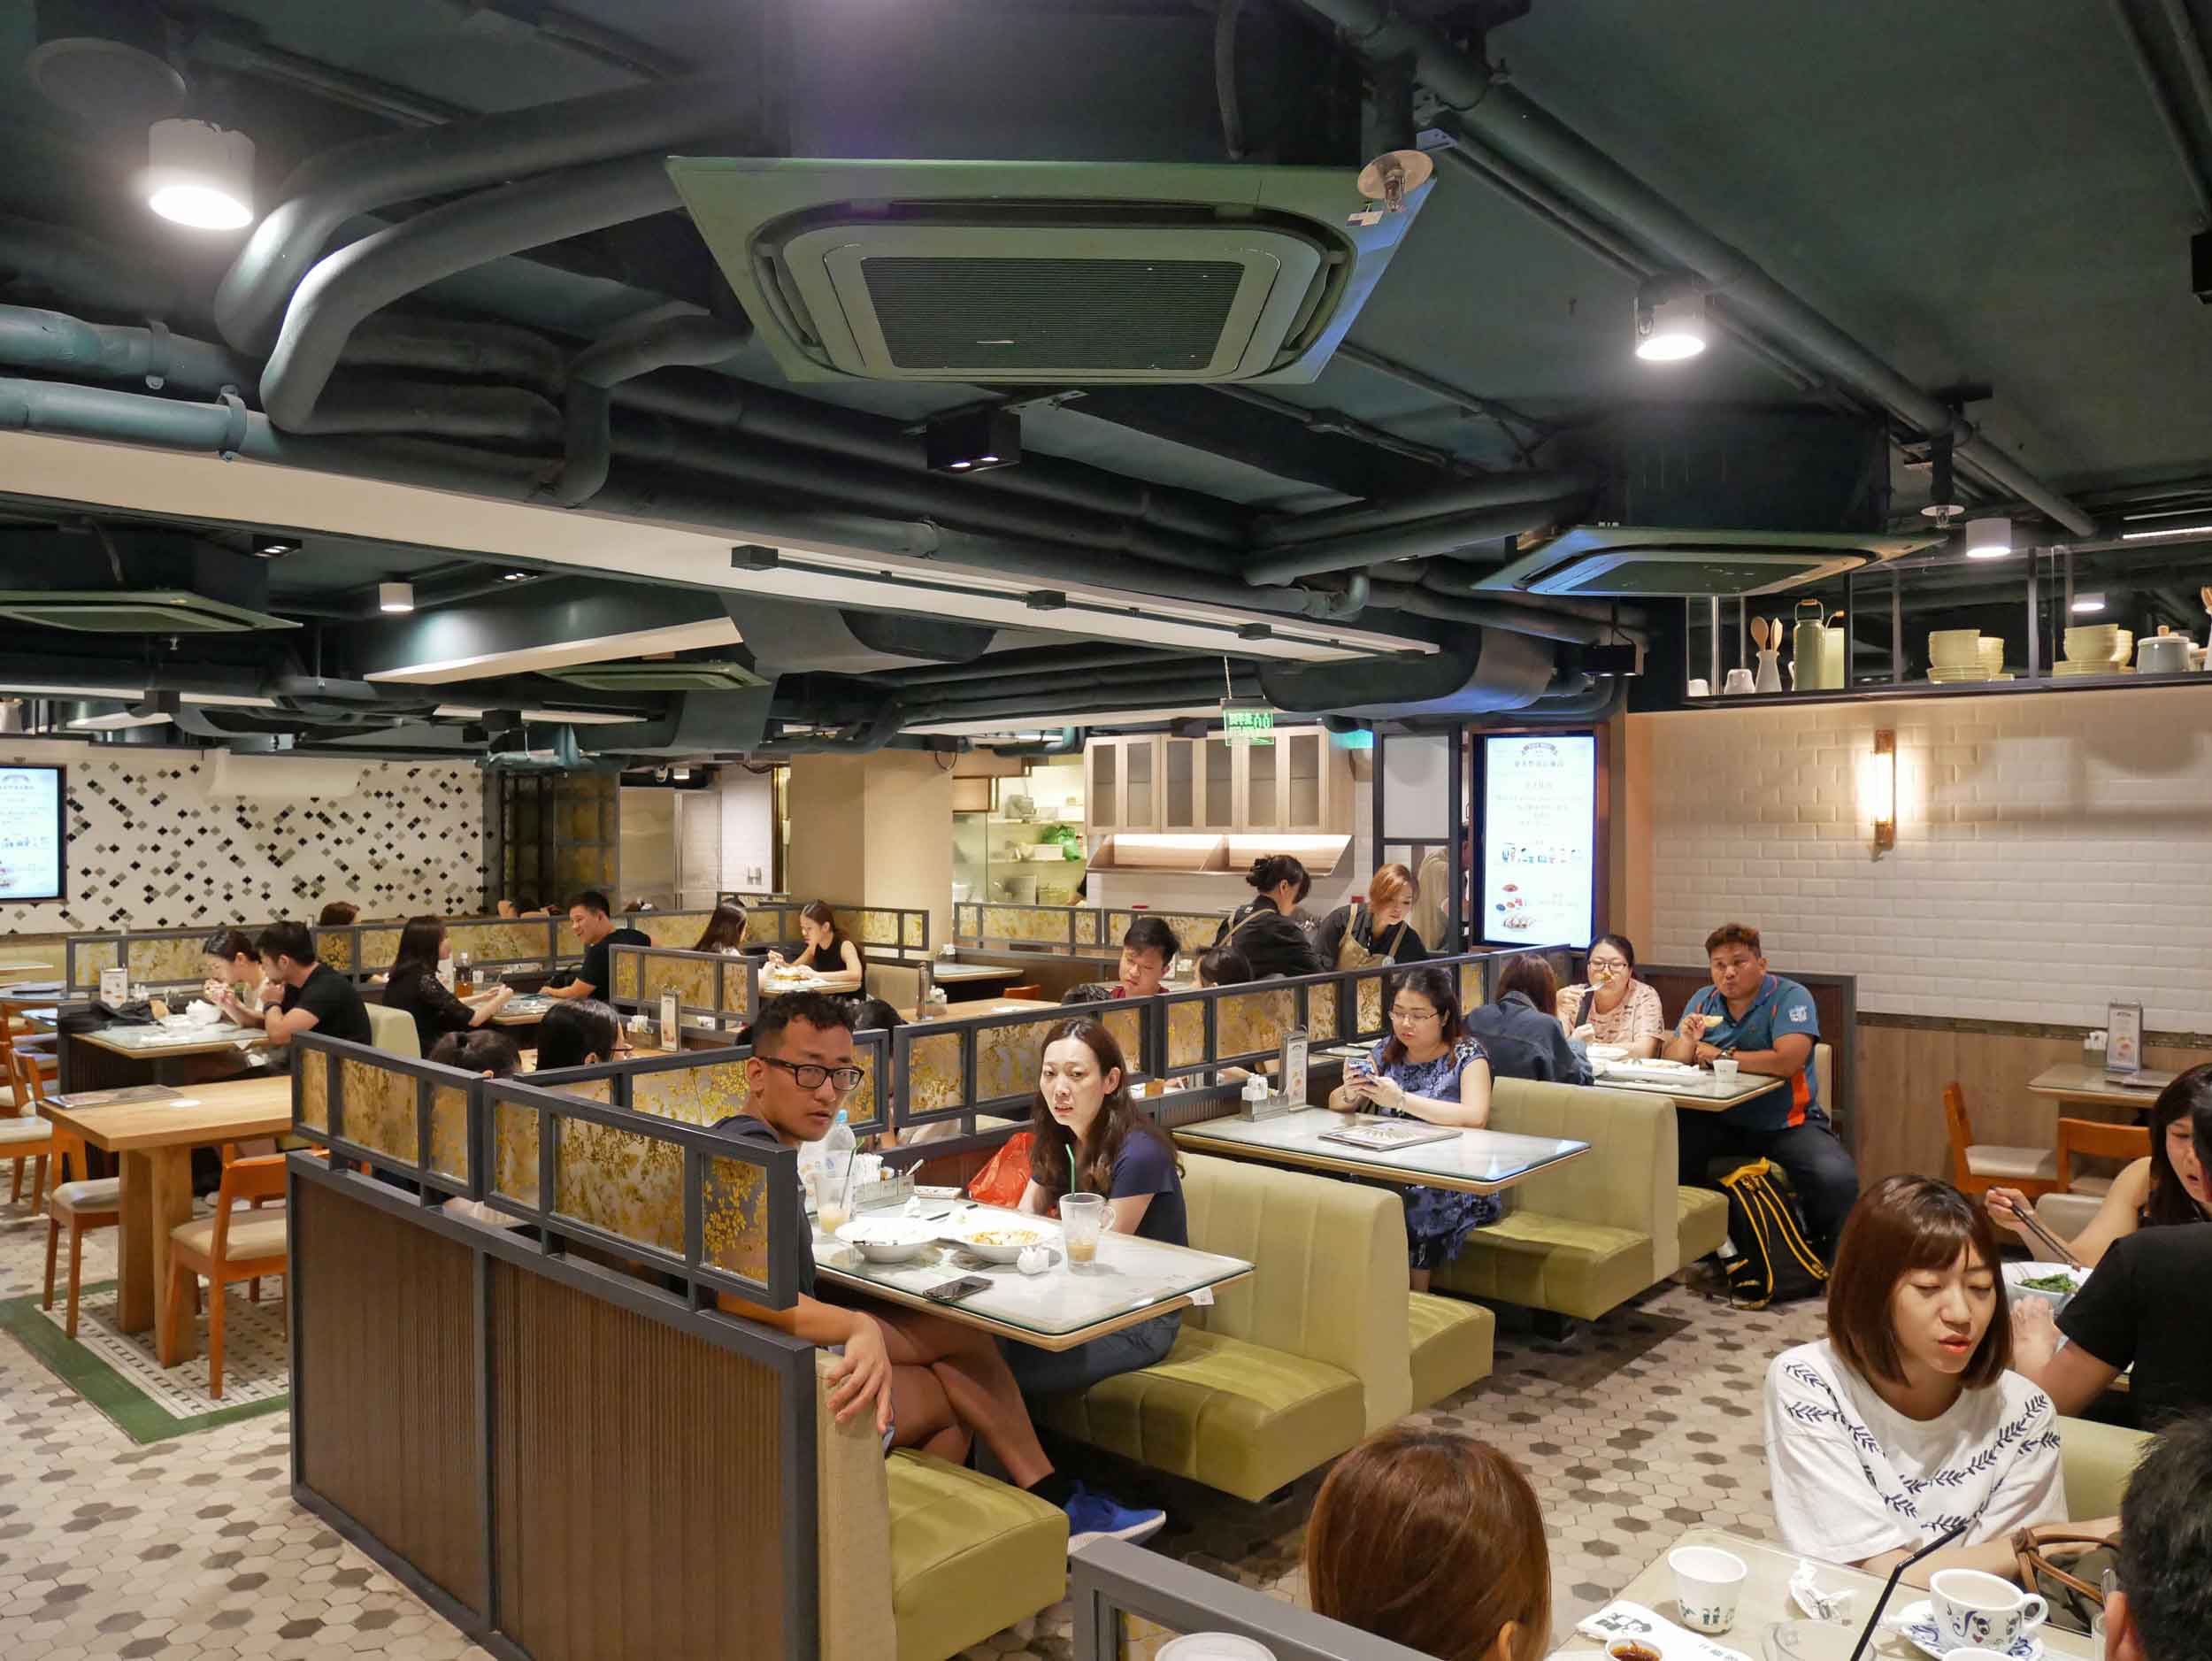  Patrons of Tsui Wah feasting on traditional Cantonese fare at this modern tea restaurant.&nbsp; 